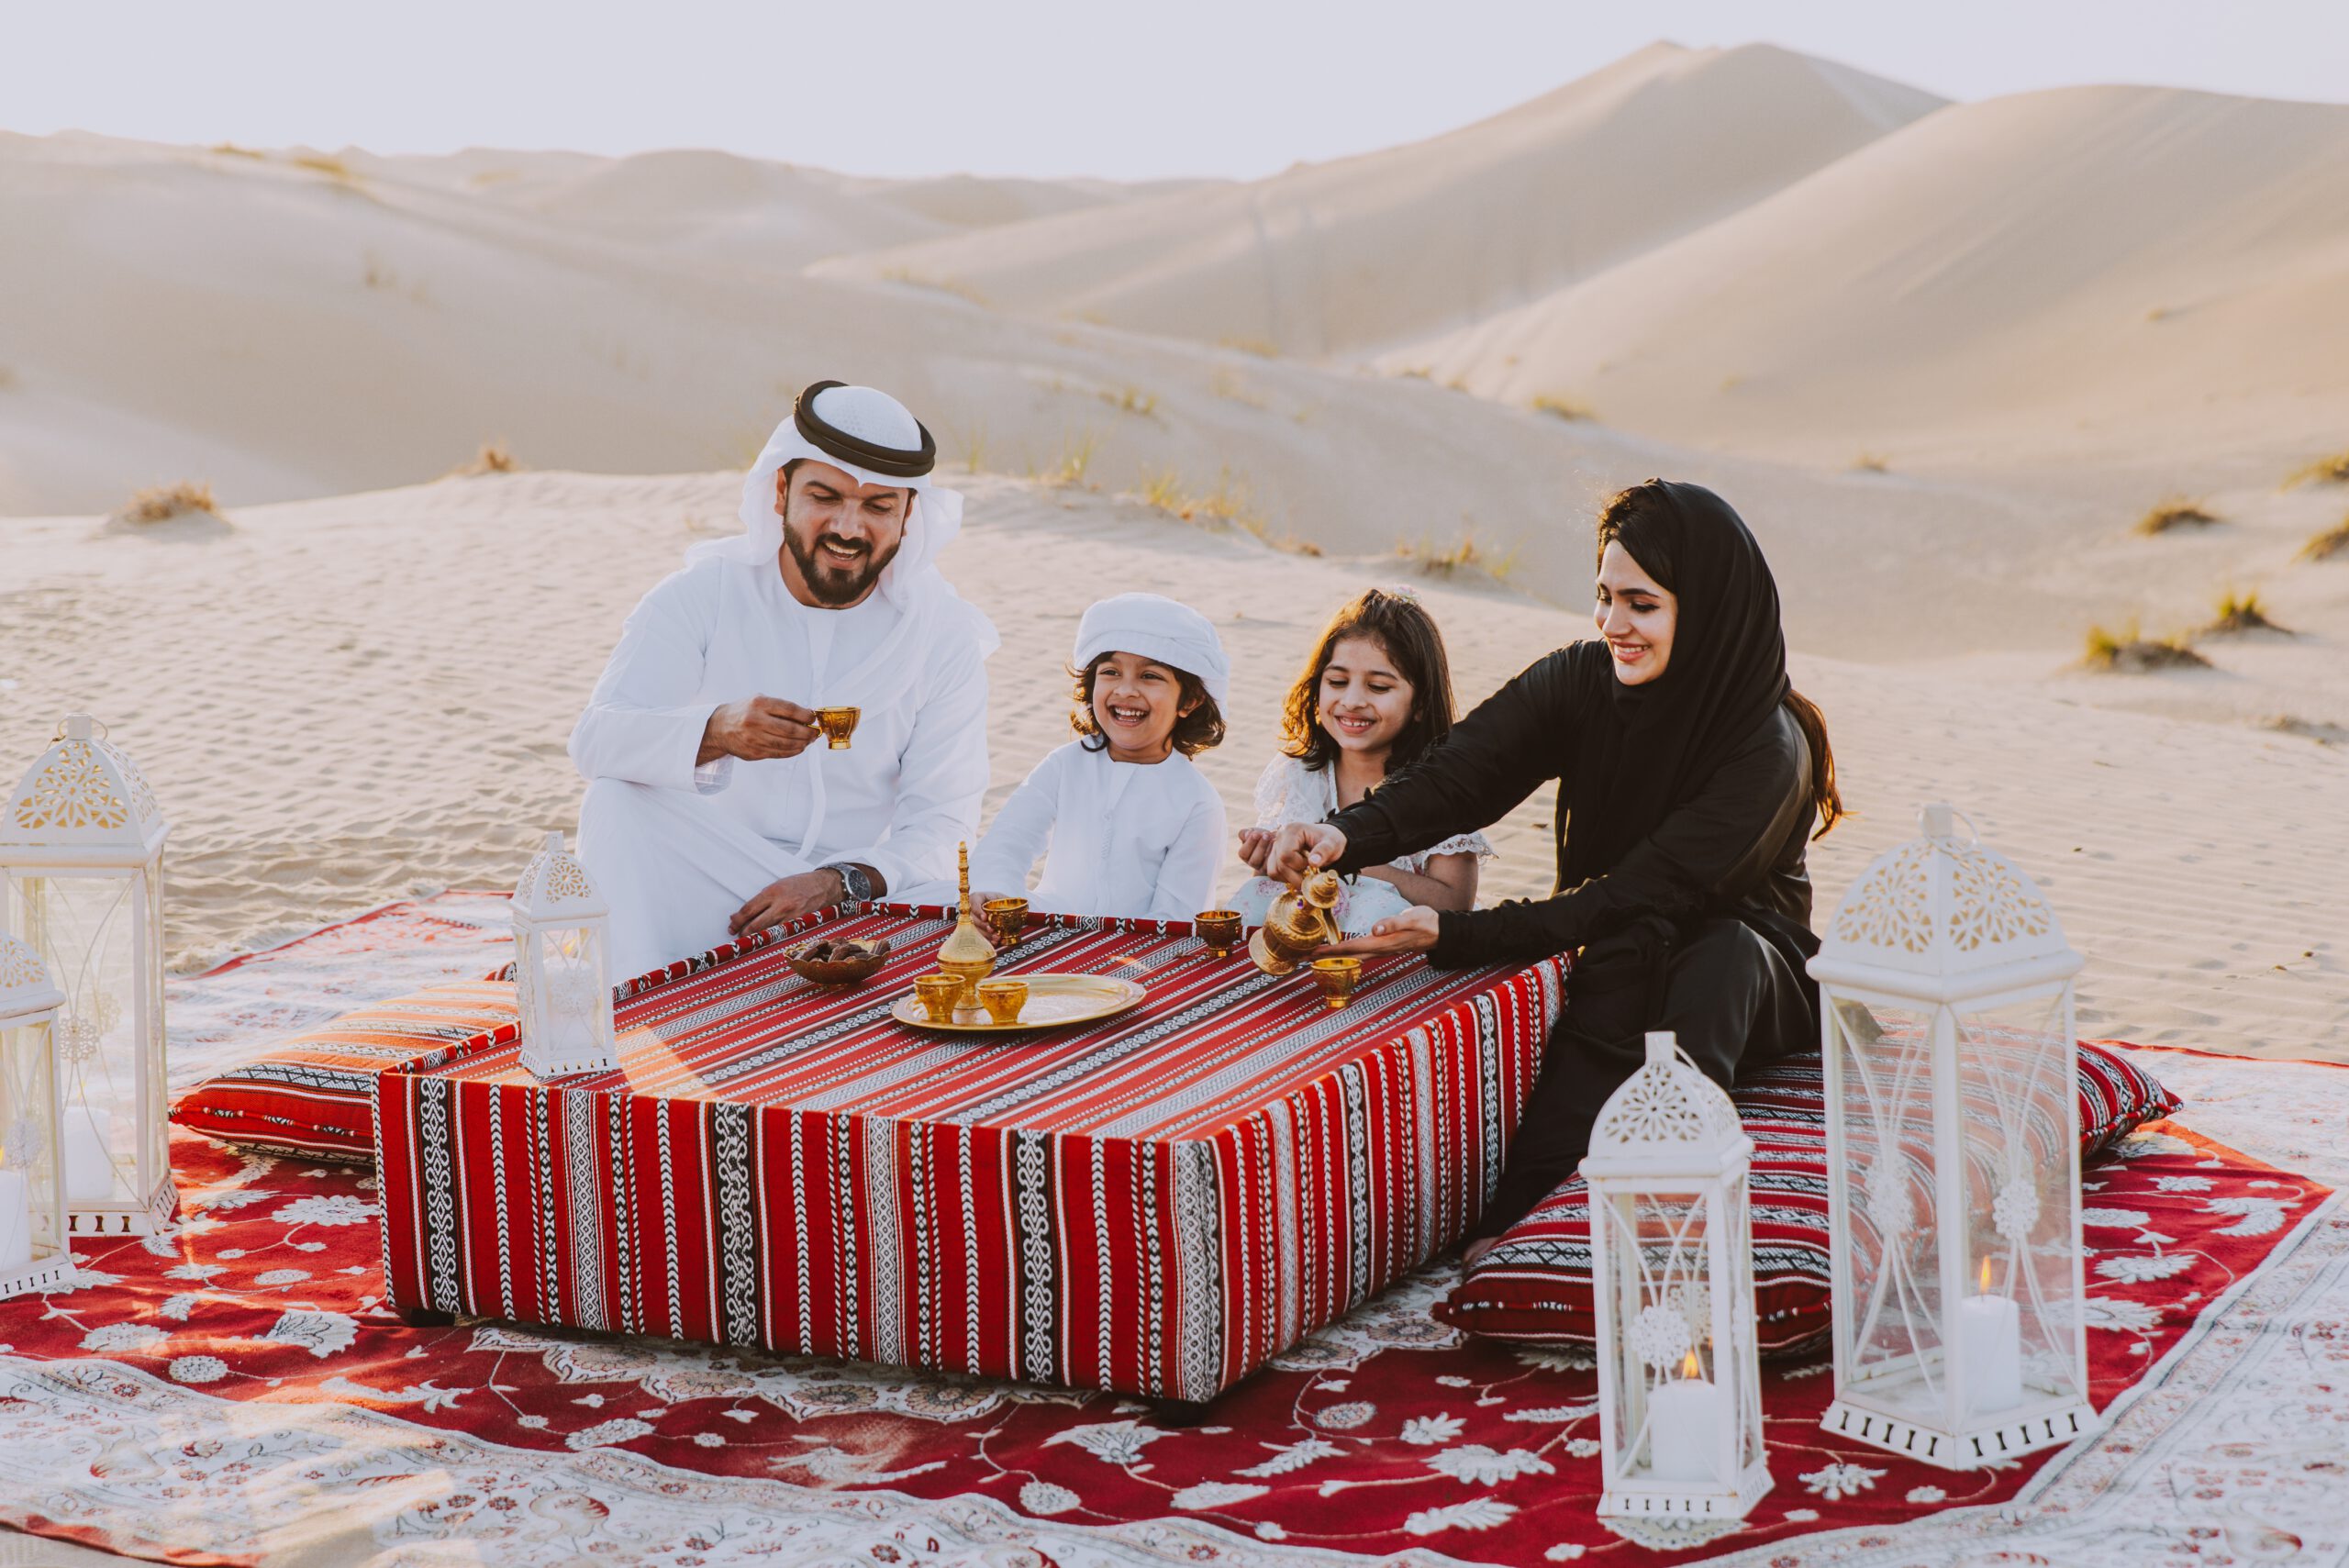 Dubai Customs and Traditions - UAE family having a traditional meal